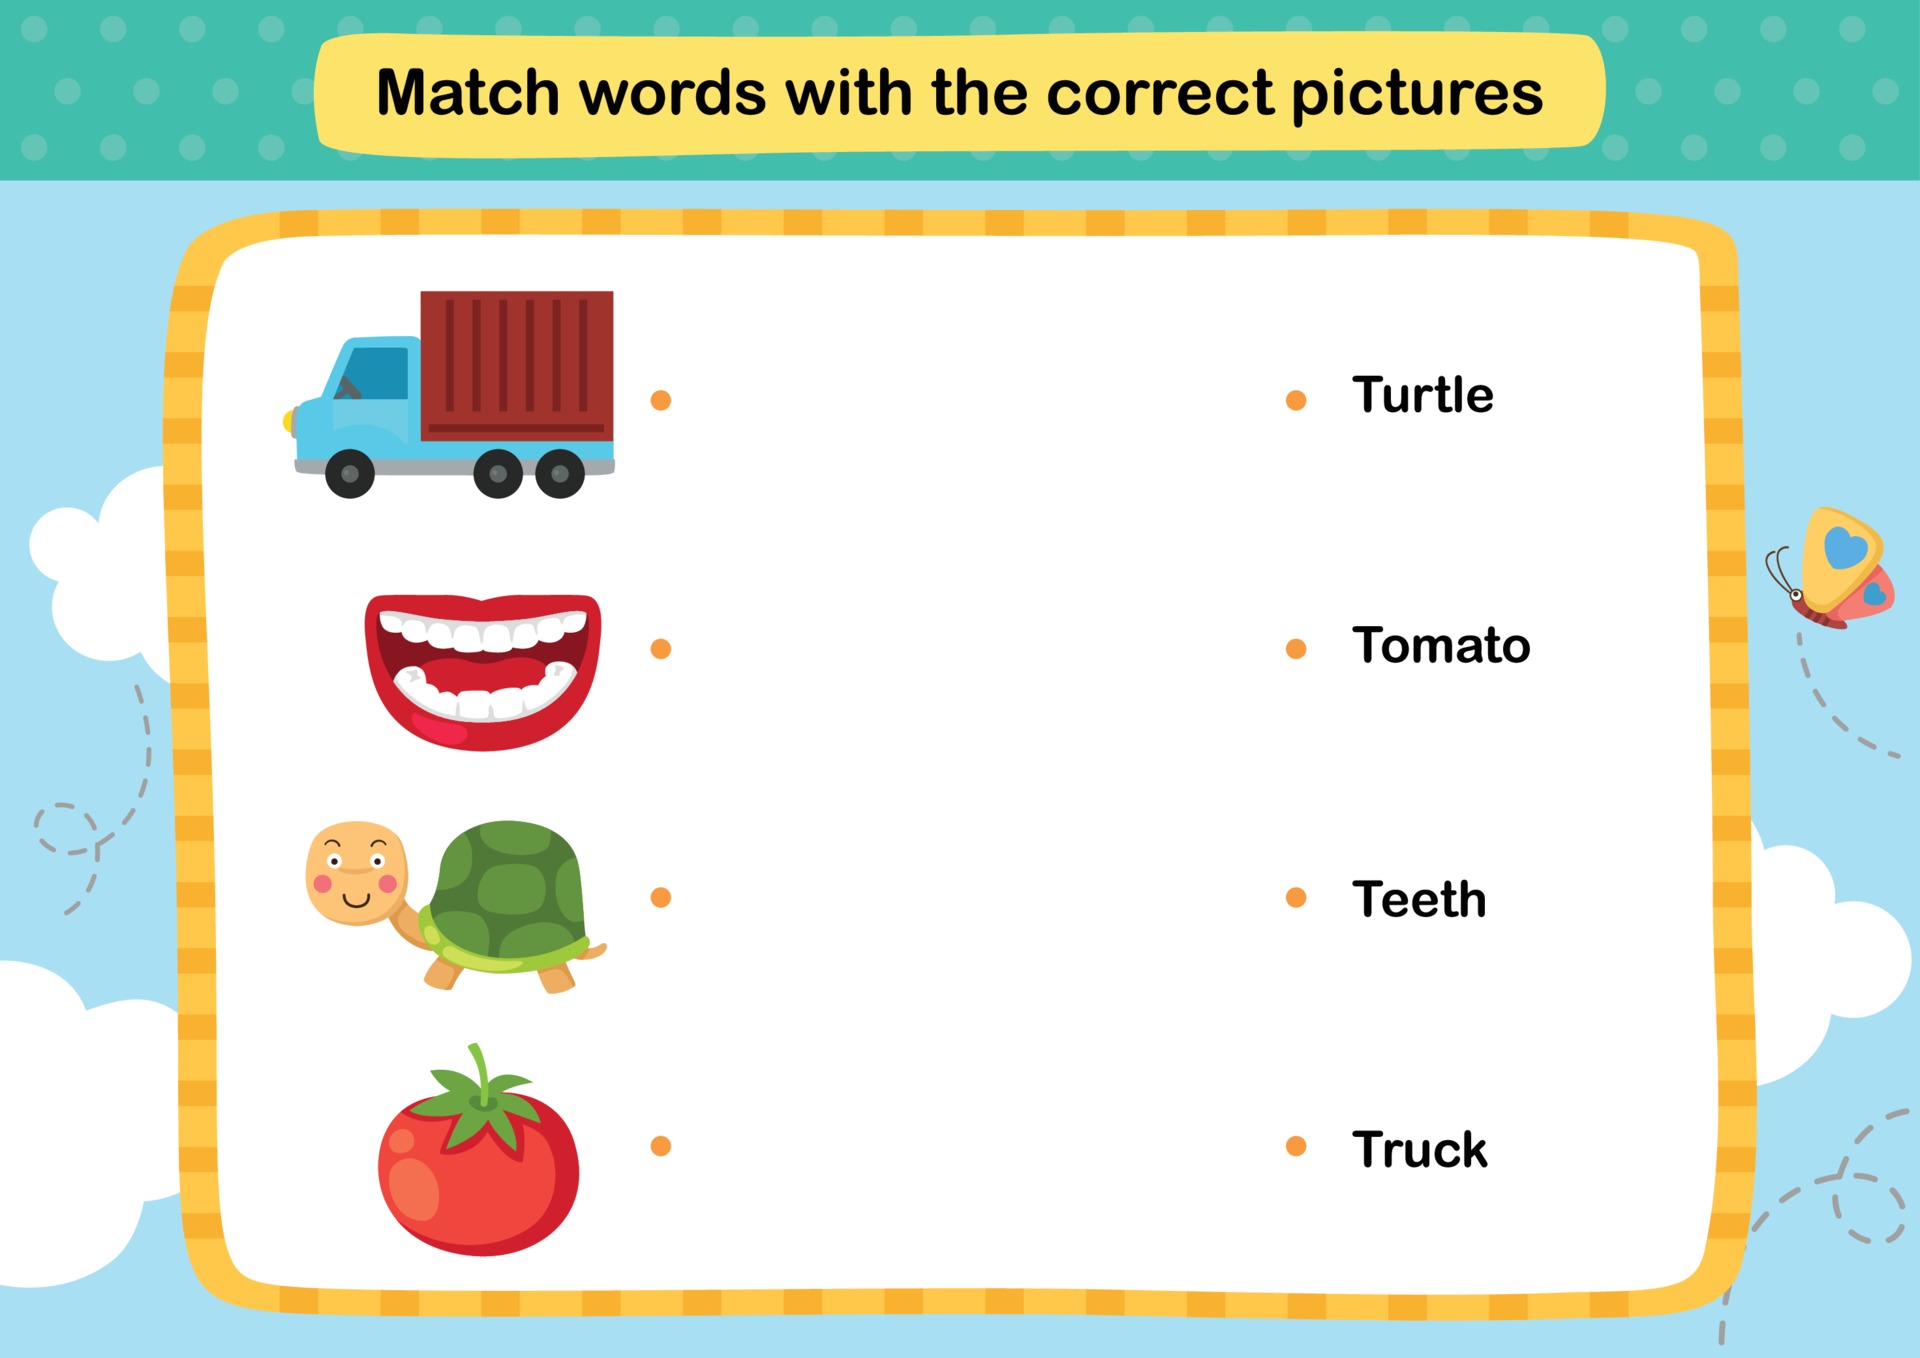 Match the words popular. Match the Words with the pictures. Match the Words with the correct images. Match the Words to the correct picture.. Match the pictures to the correct Shapes перевод.